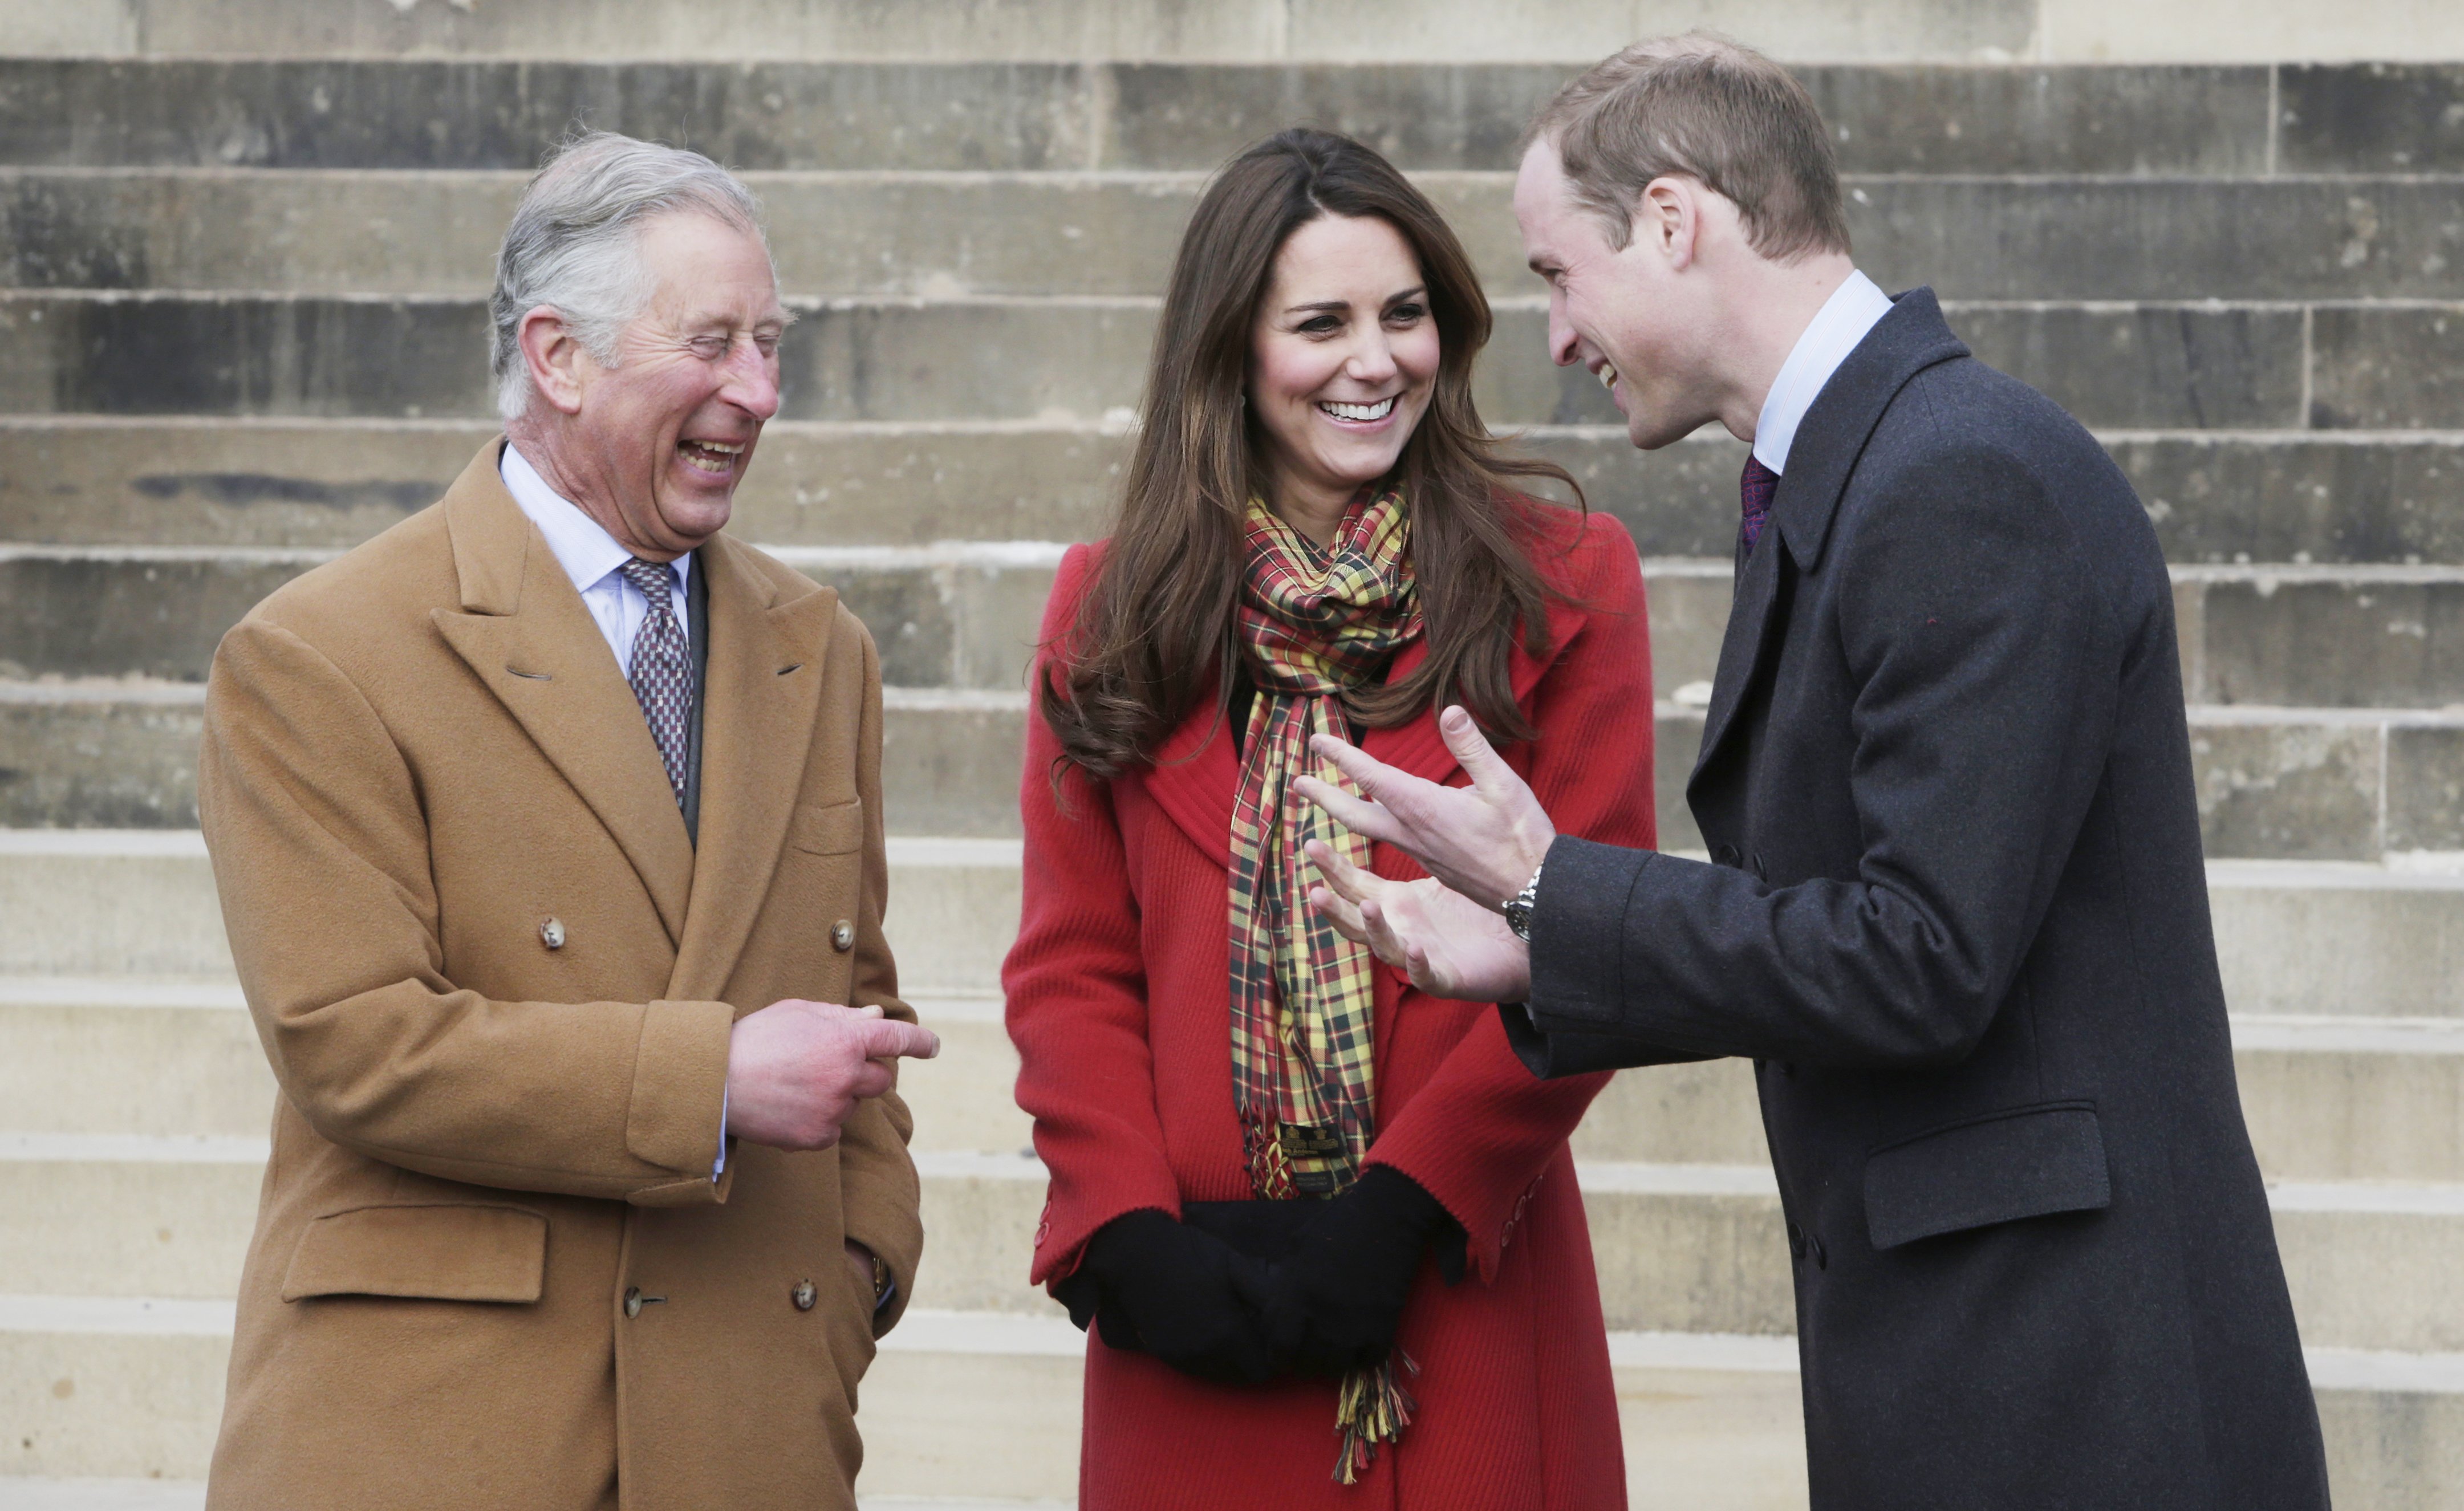 Prince Charles, Prince of Wales, known as the Duke of Rothesay, Catherine, Duchess of Cambridge, known as the Countess of Strathearn, and Prince William, Duke of Cambridge, known as the Earl of Strathearn, when in Scotland during a visit to Dumfries House on March 05, 2013 in Ayrshire, Scotland. | Source: Getty Images